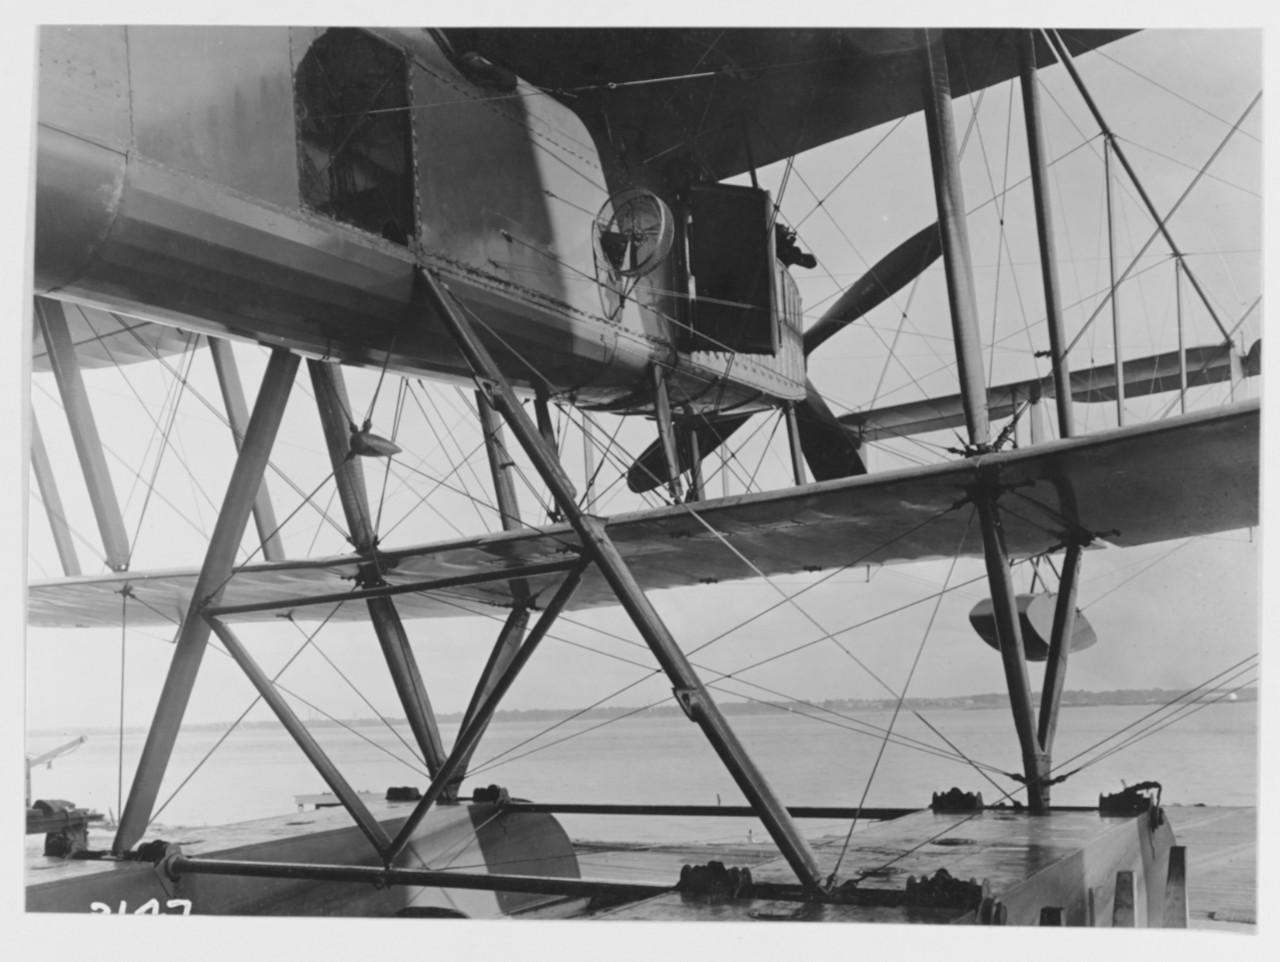 N-1 Seaplane, body supporting structure